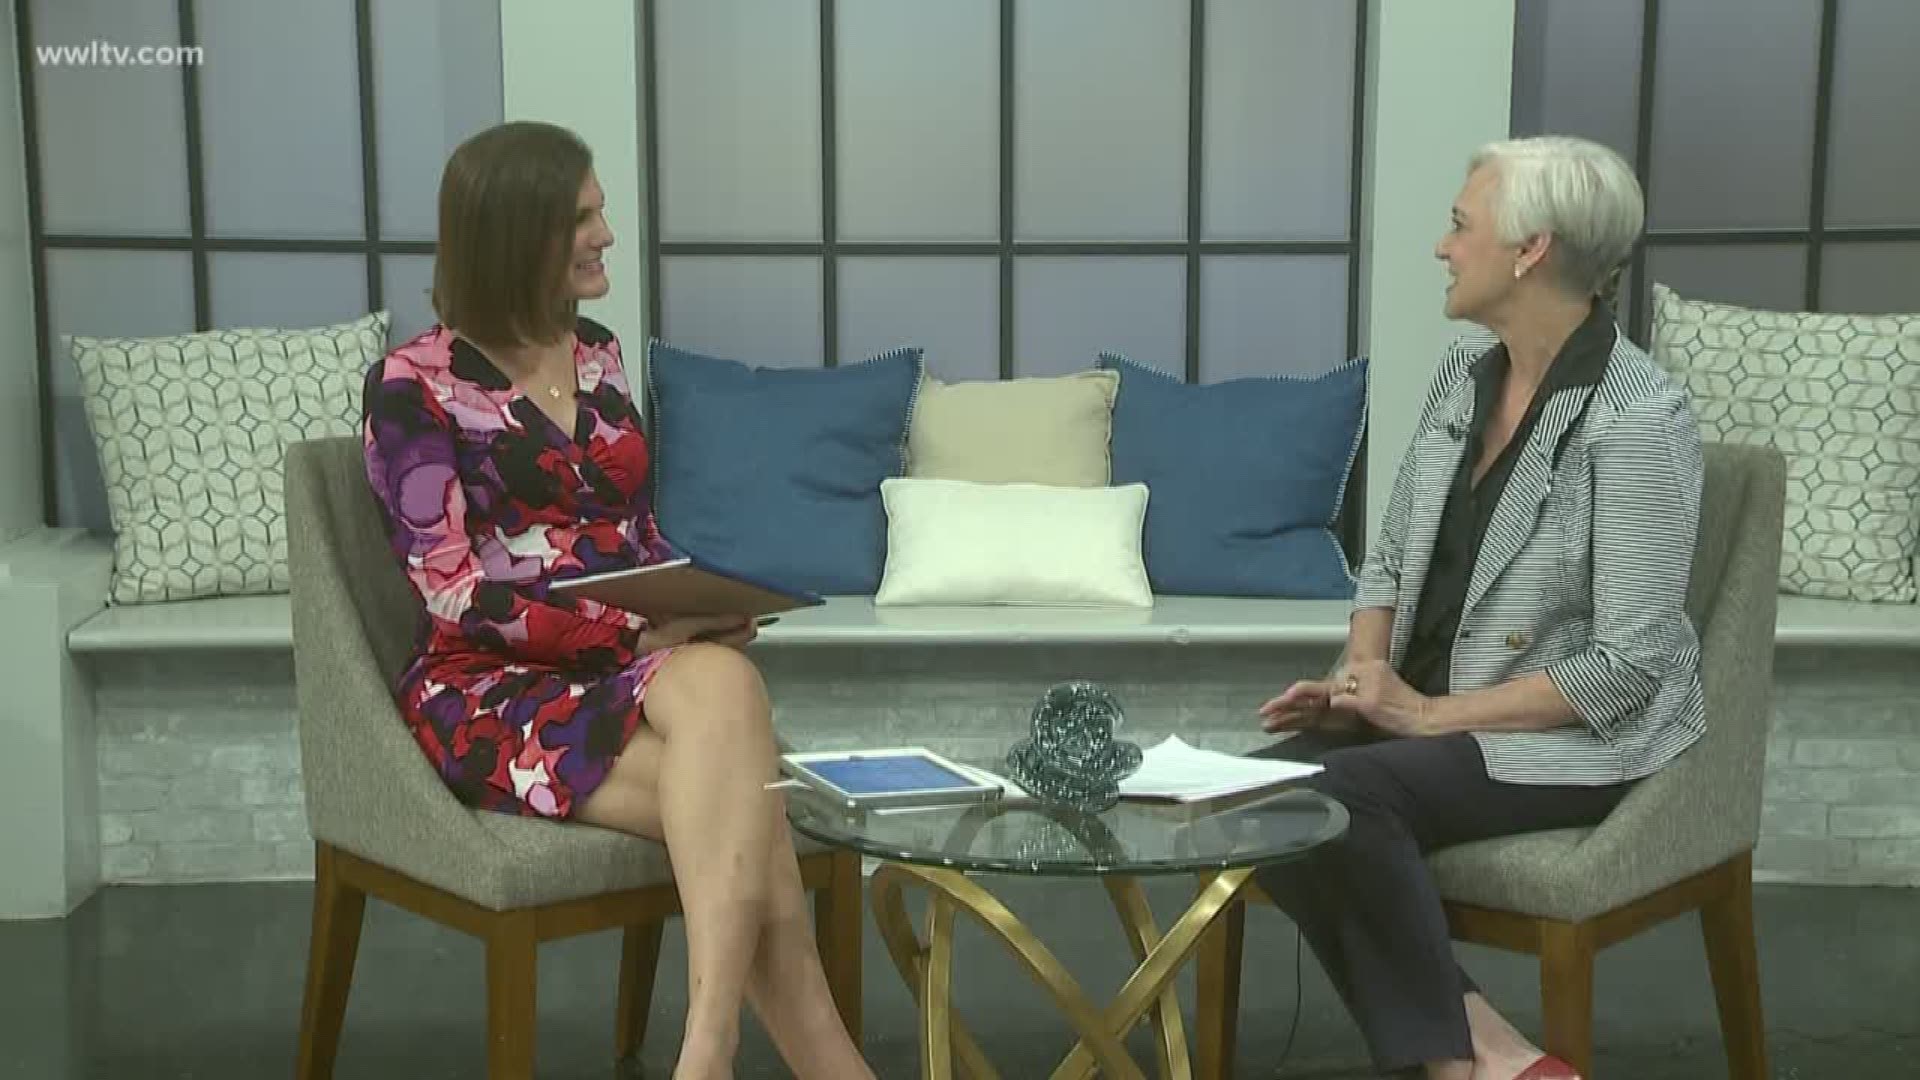 Barbara Leblanc, the director of the Parenting Center, is here to talk about how to keep your child from having a temper tantrum.